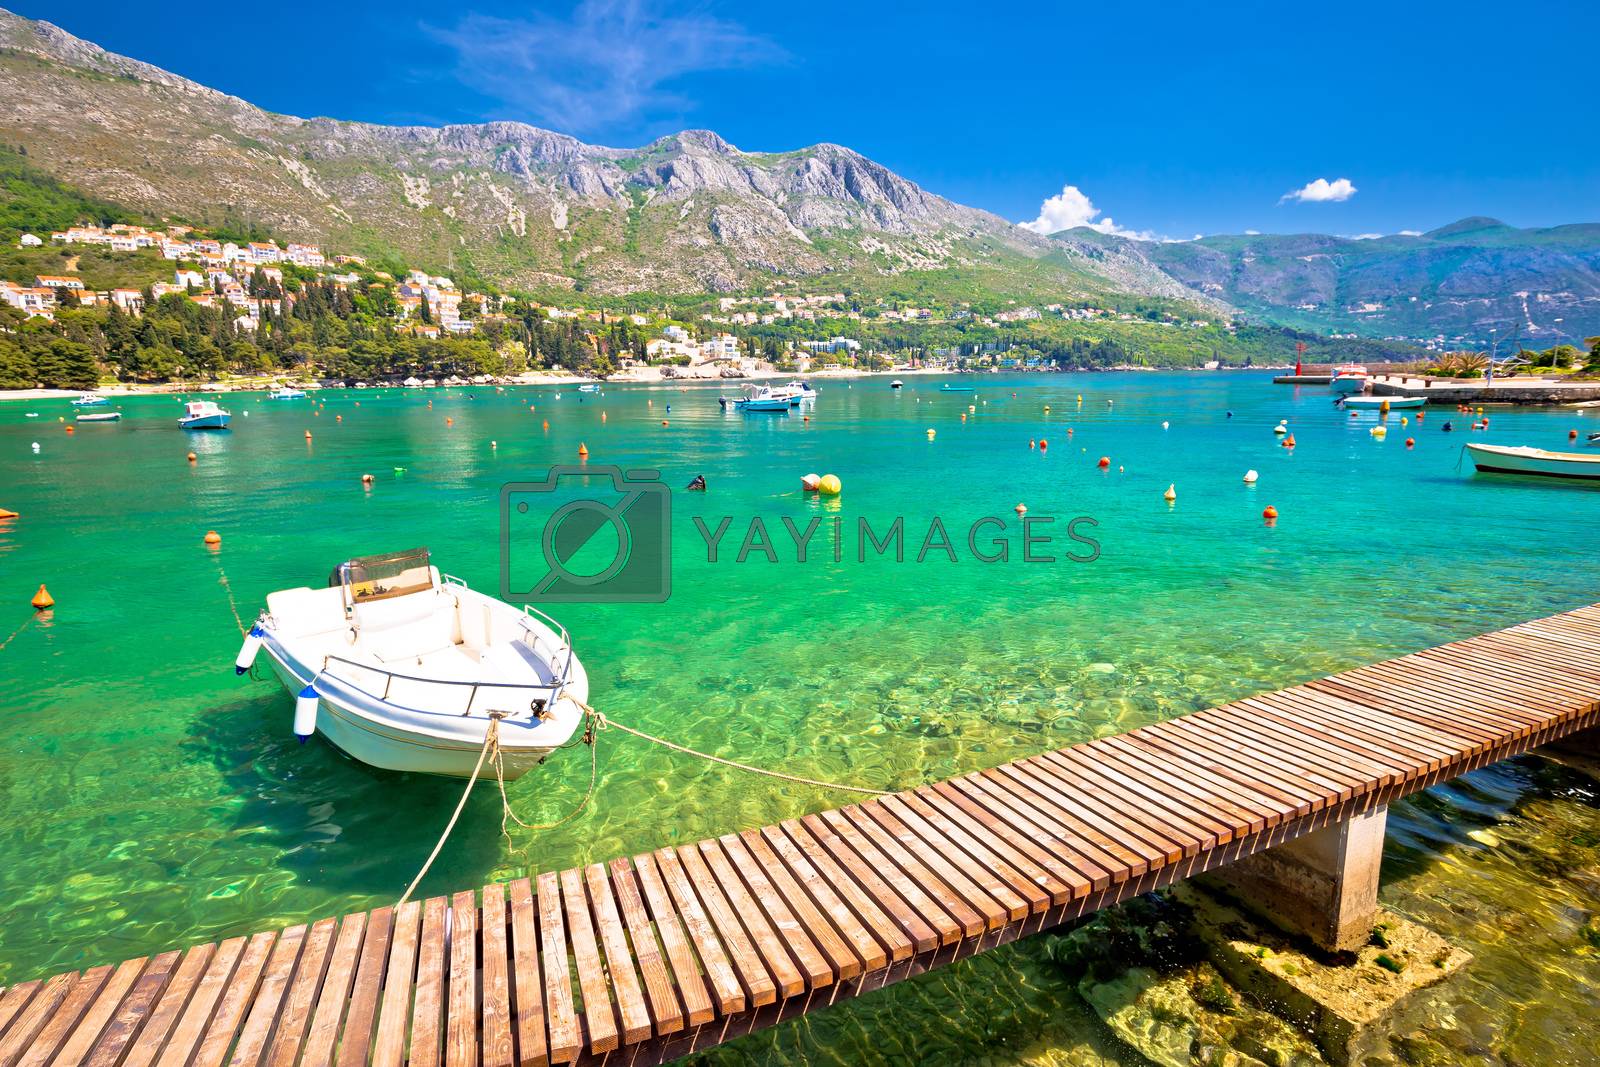 Royalty free image of Srebreno coastline and waterfront view by xbrchx